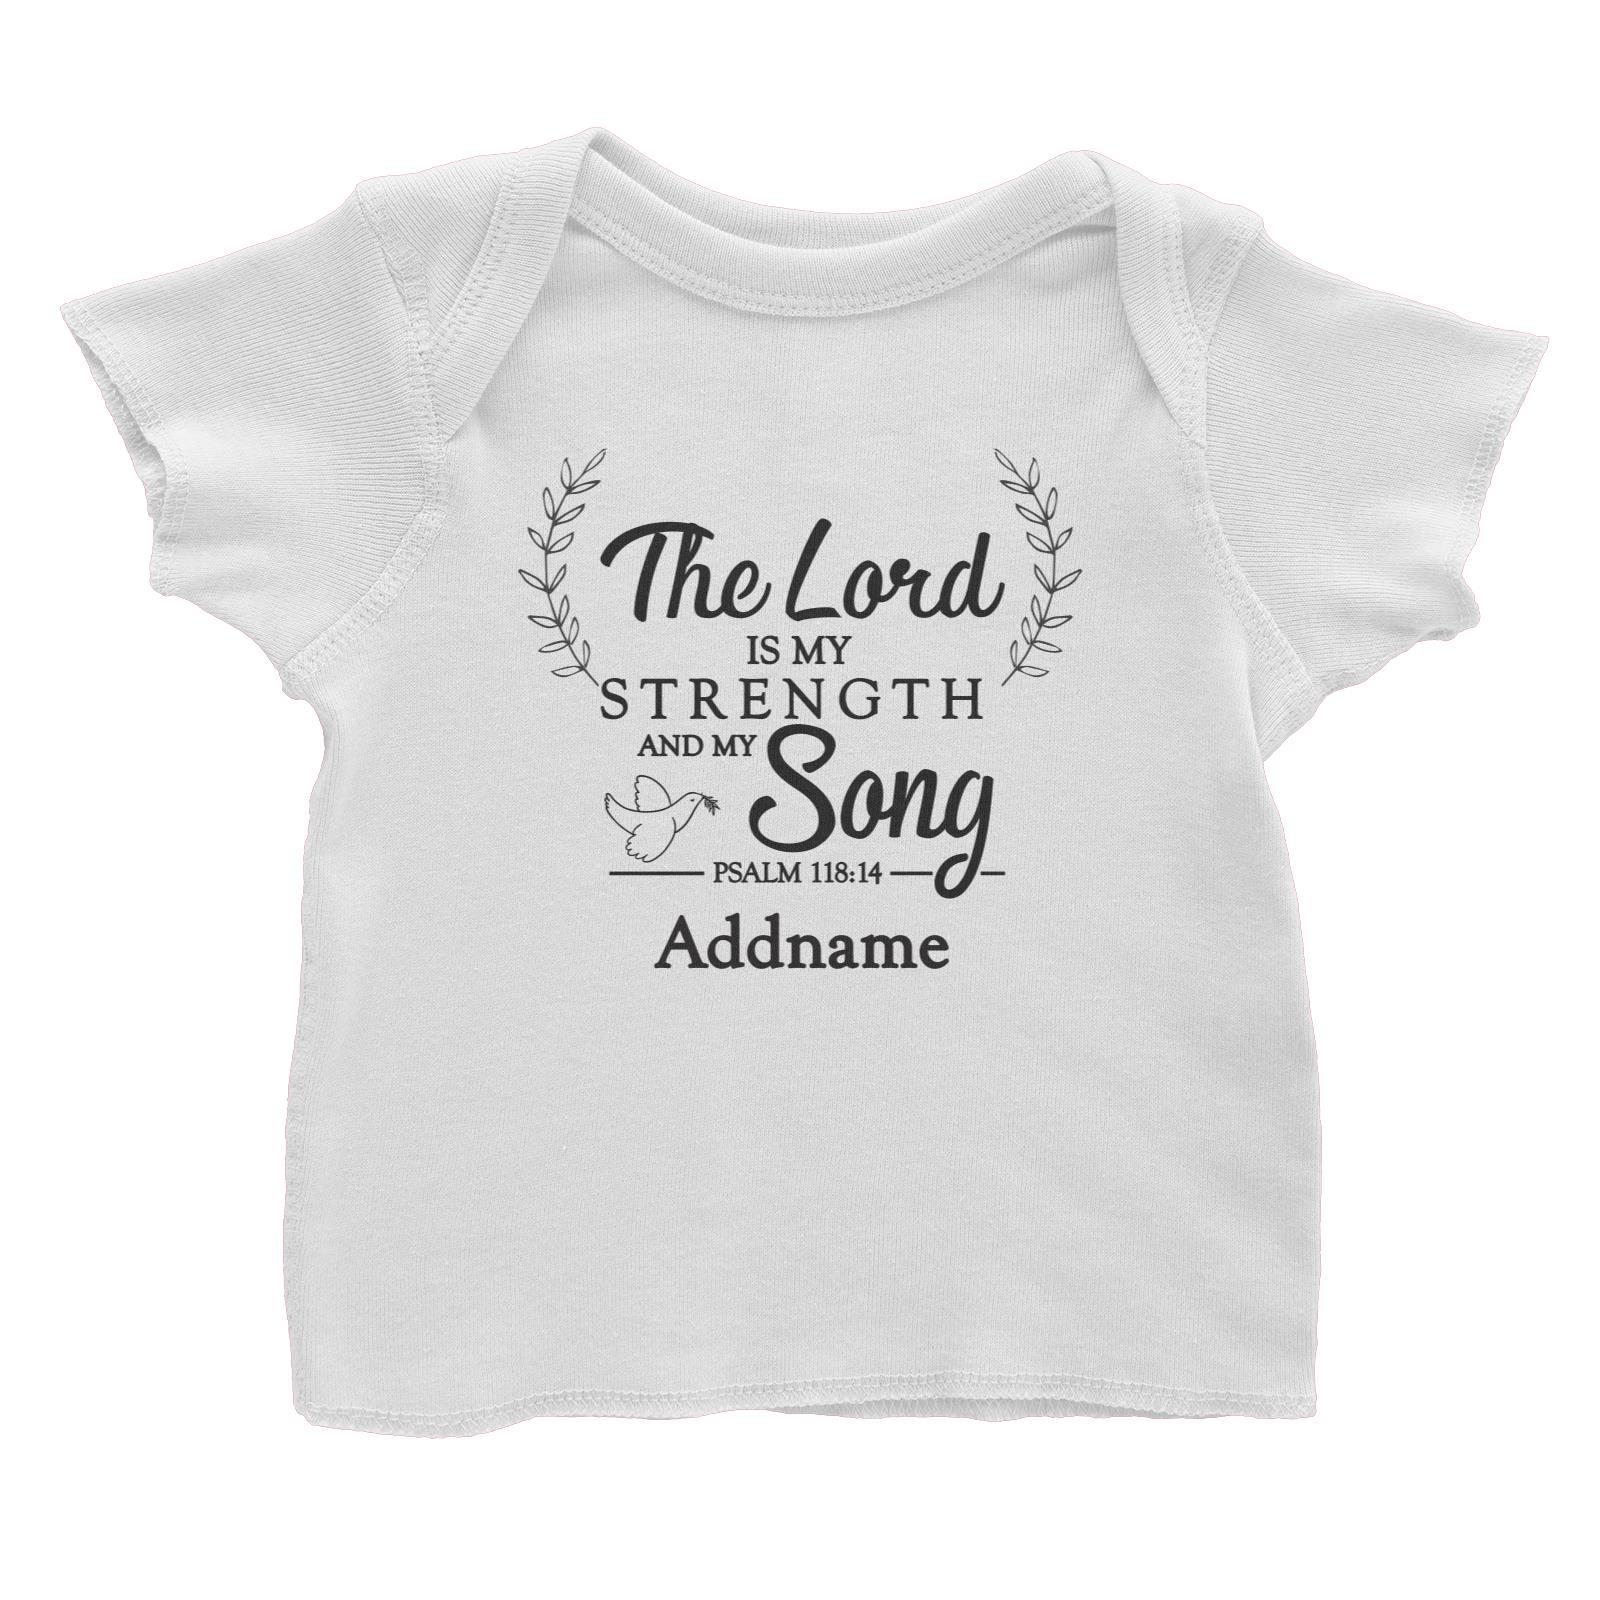 Christian Series The Lord Is My Strength Song Psalm 118.14 Addname Baby T-Shirt